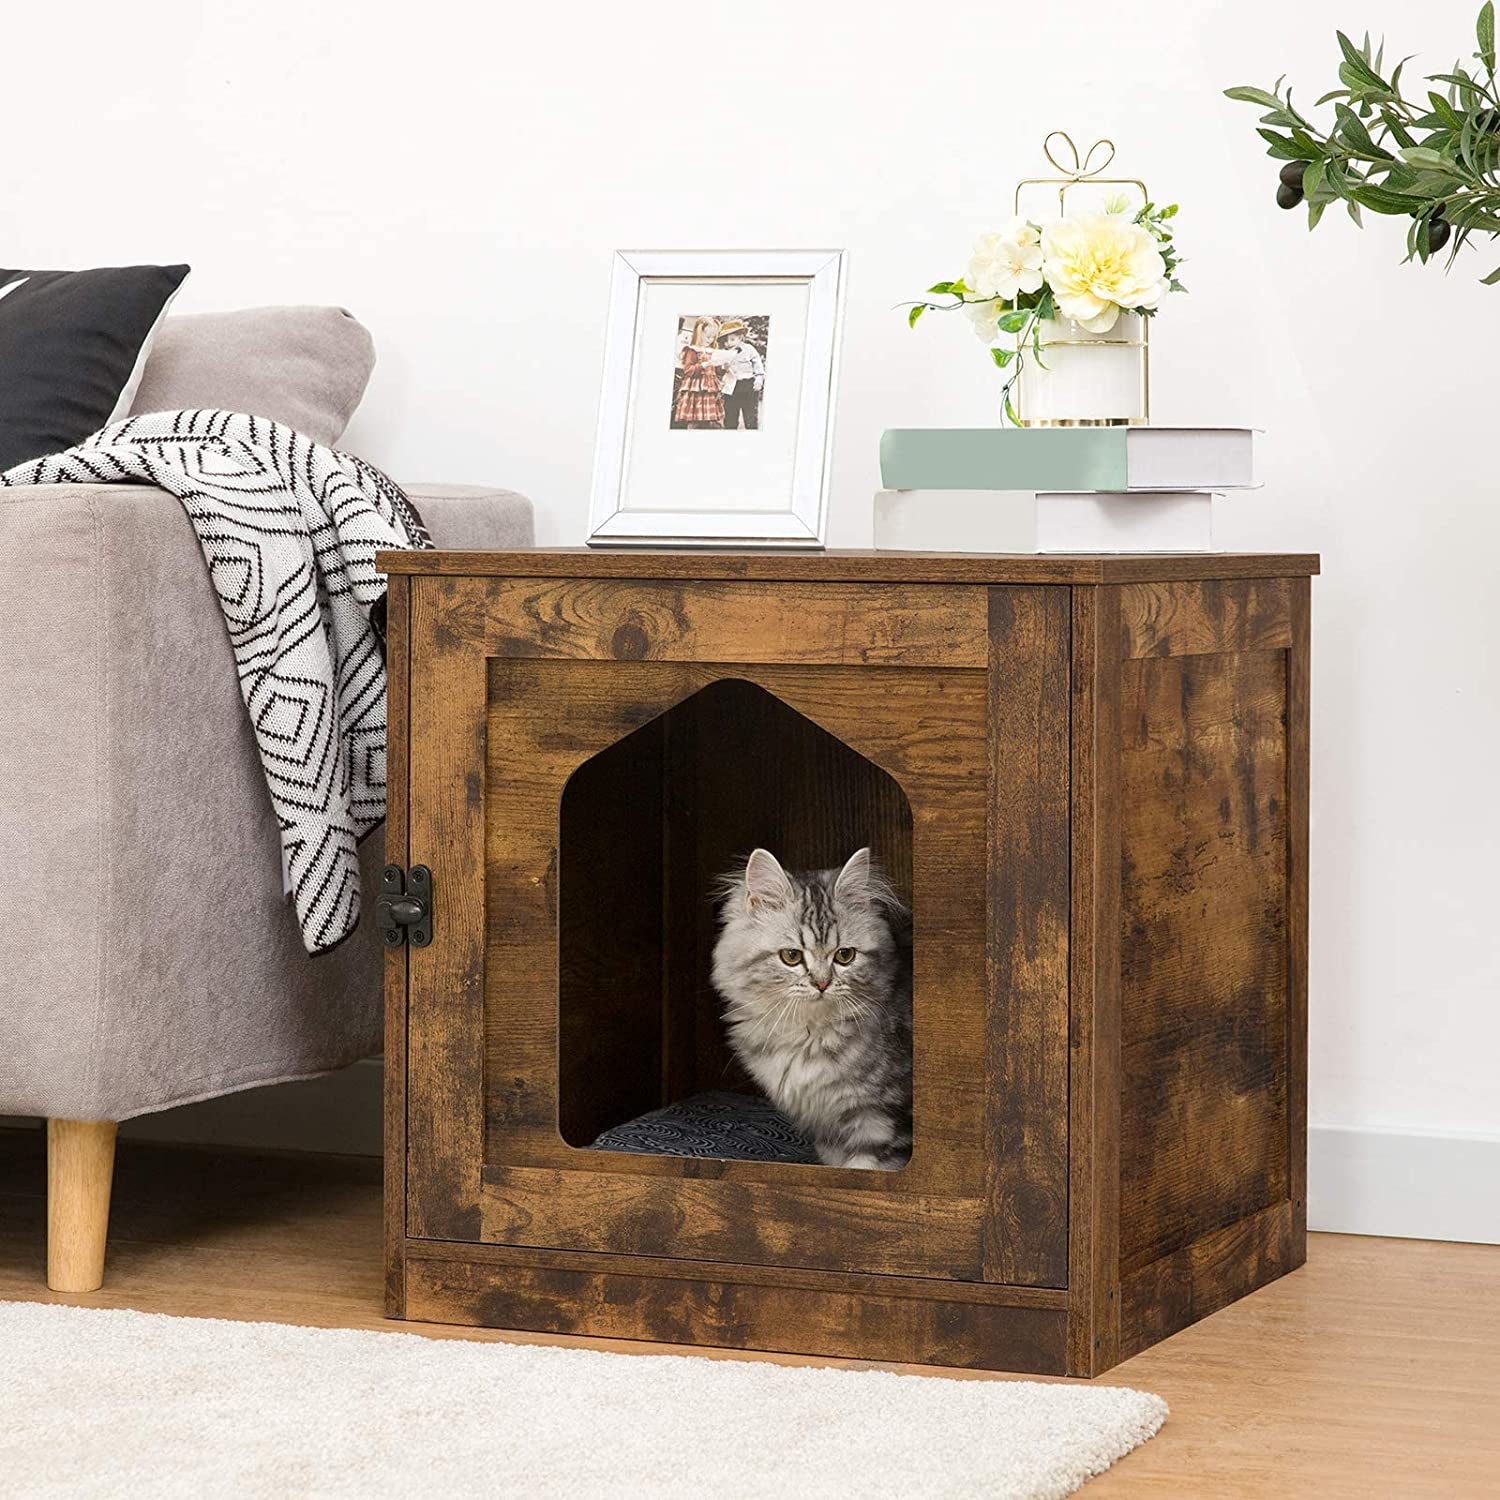 MZDXJ Cat Litter Box Enclosure, Hidden Litter Box Furniture, Enclosed Cat House Side Table, Cat Washroom with Door, Enlarged Cat Litter Cabinet for Fat Orange Cat, Nightstand, Rustic Brown BF01MW01